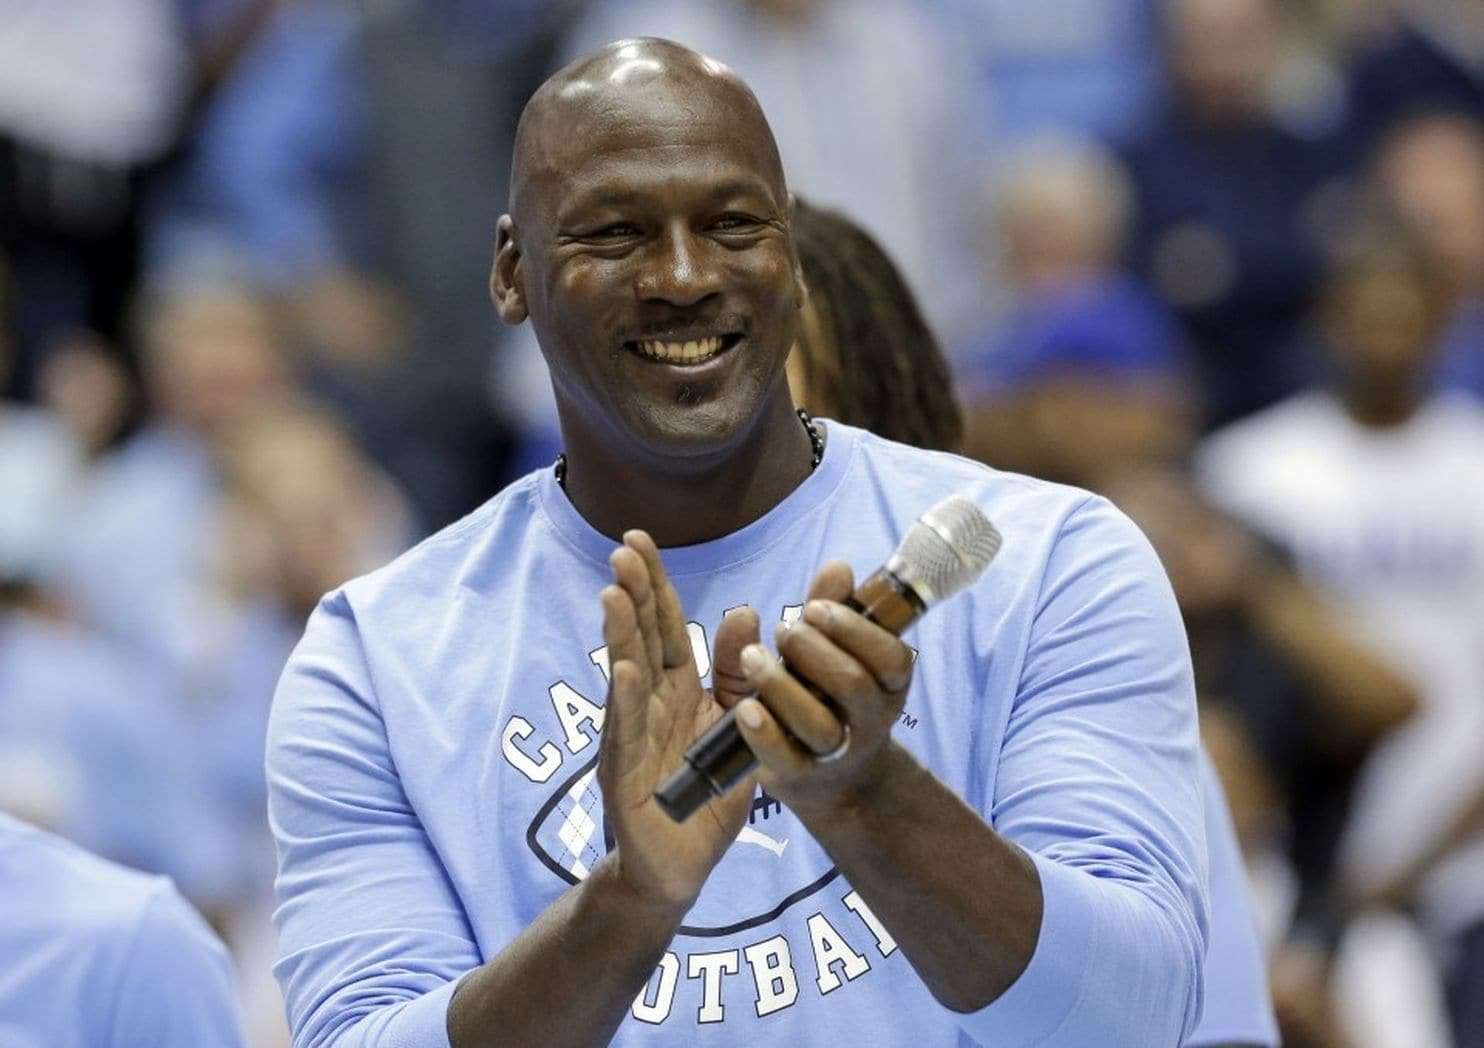 image for ‘You gotta take care of home’: Michael Jordan donates $2 million to Florence recovery efforts